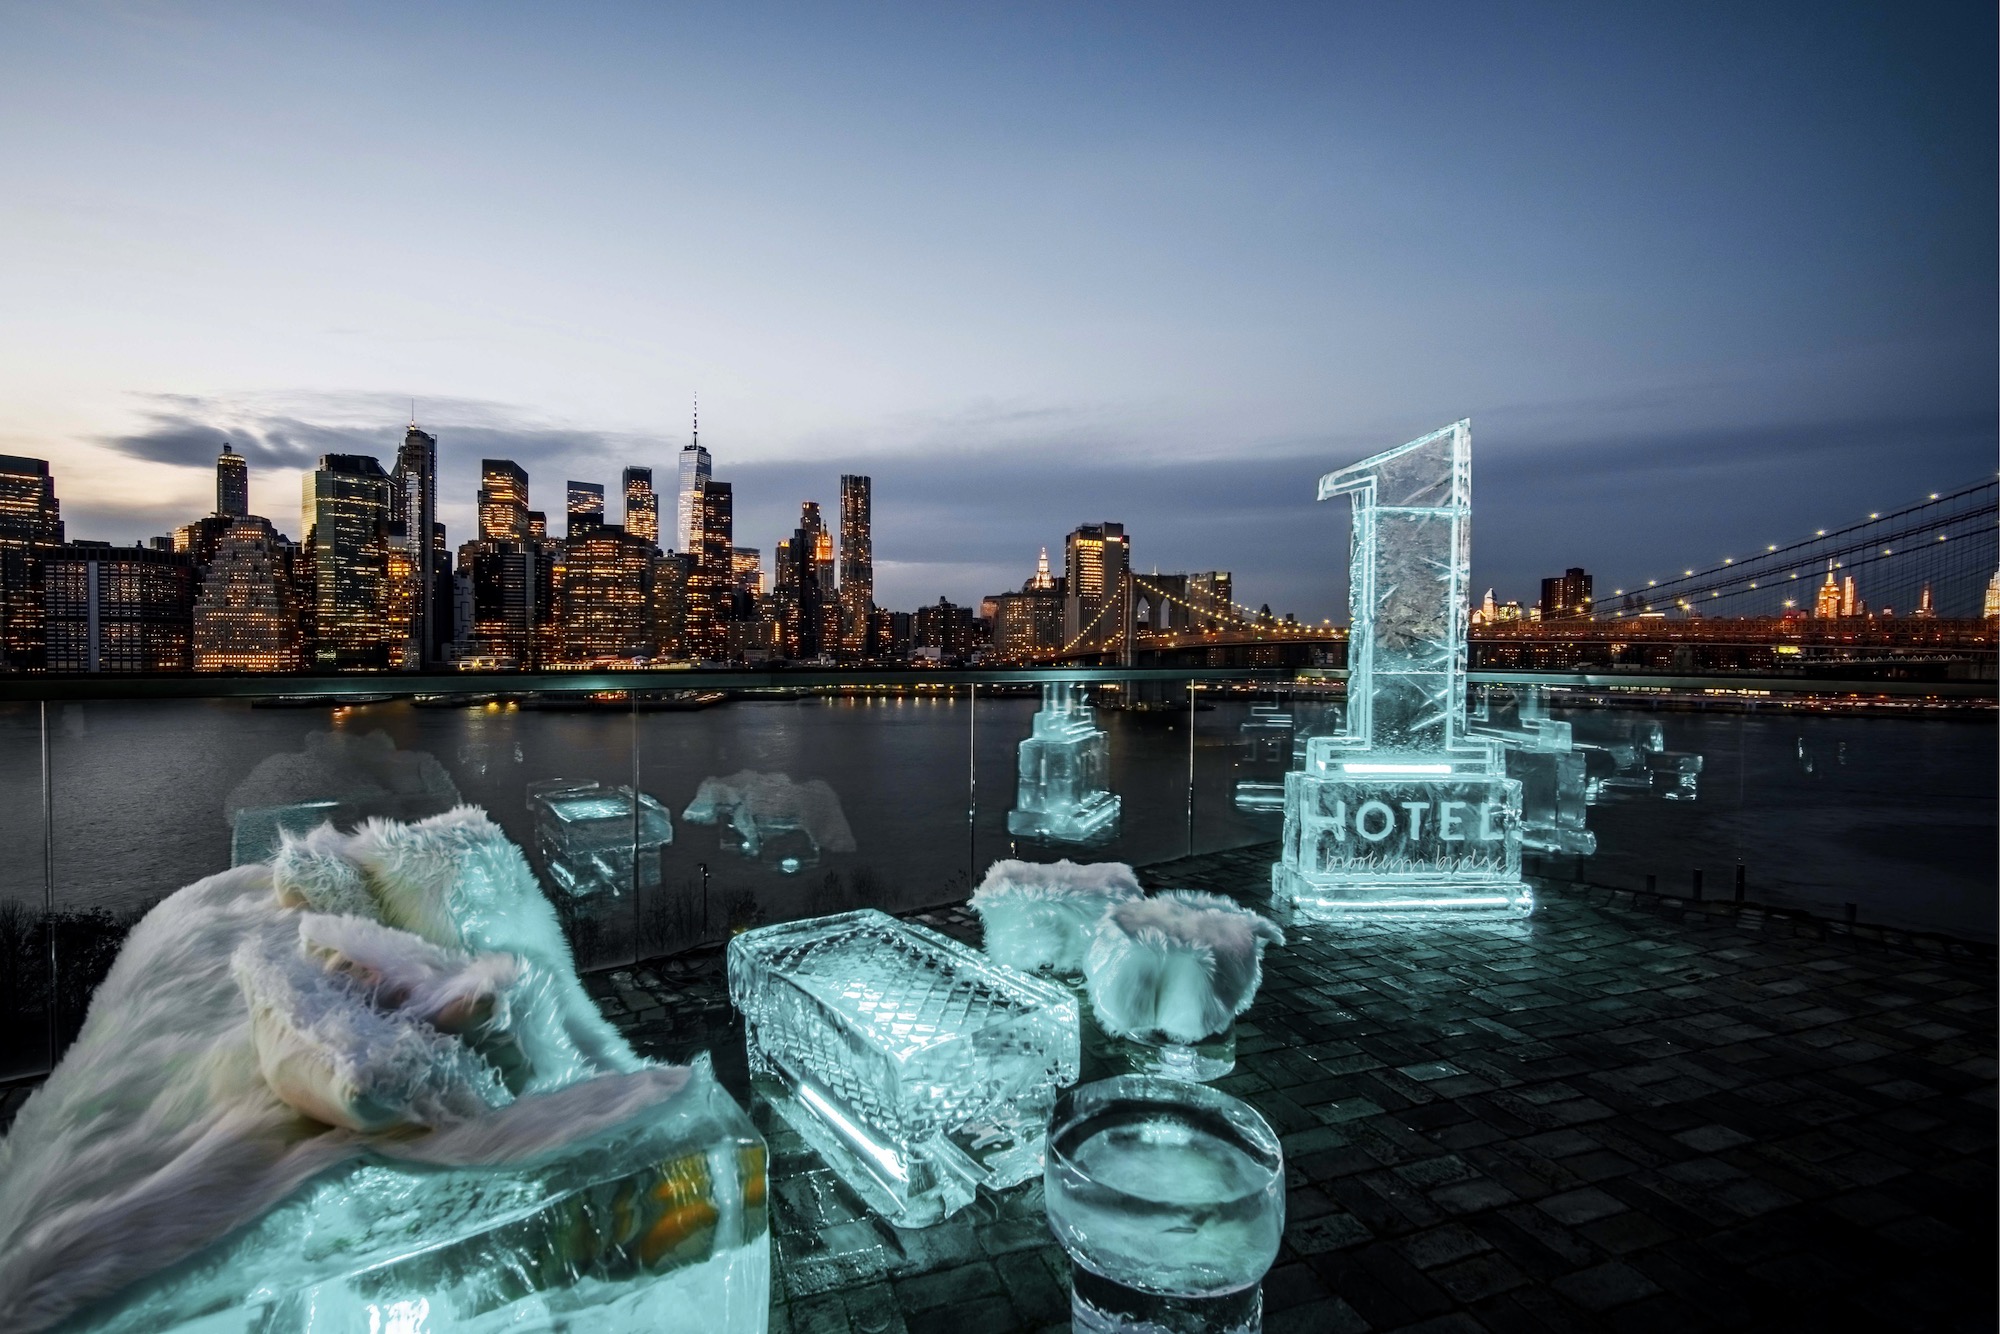 Rooftop bar made of ice opens on the Brooklyn waterfront